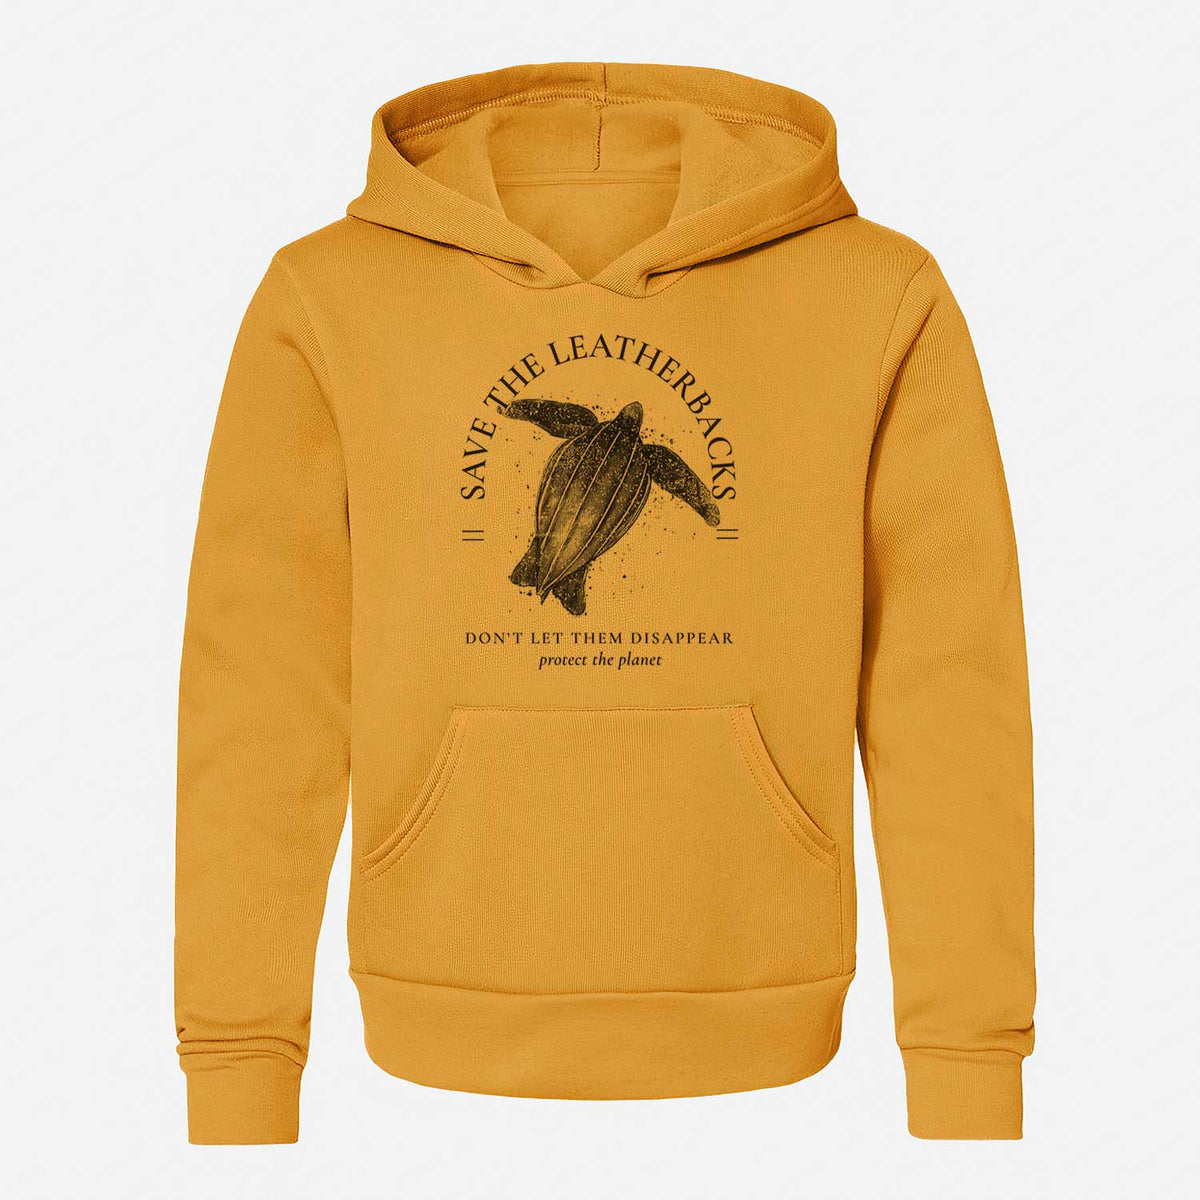 Save the Leatherbacks - Don&#39;t Let Them Disappear - Youth Hoodie Sweatshirt